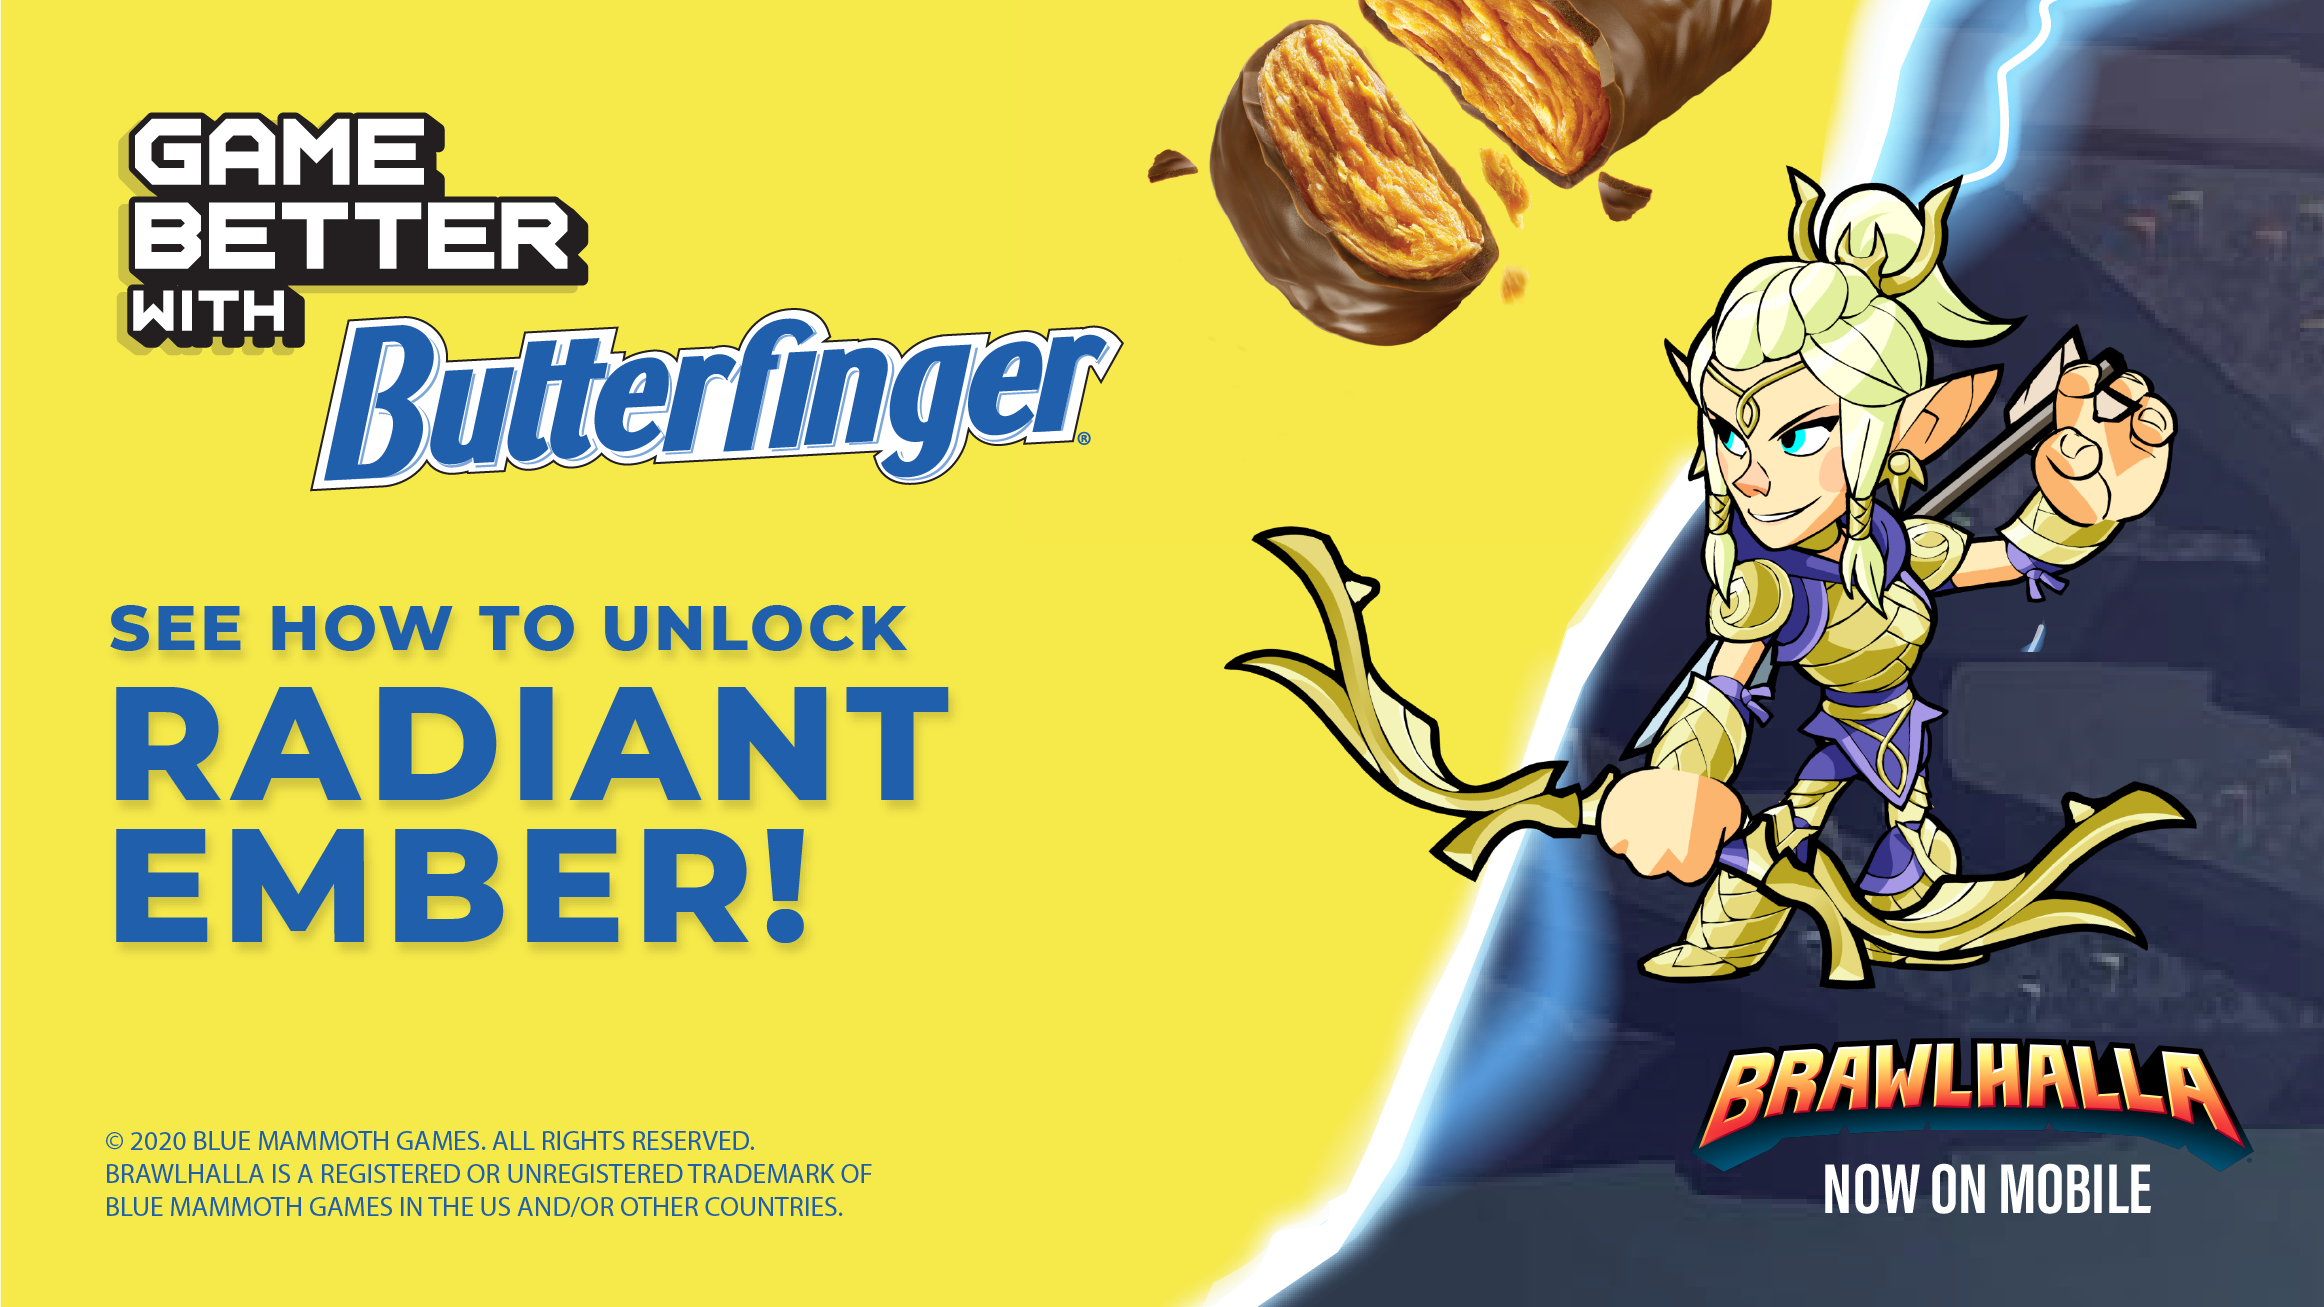 Brawlhalla x Butterfinger Promotion